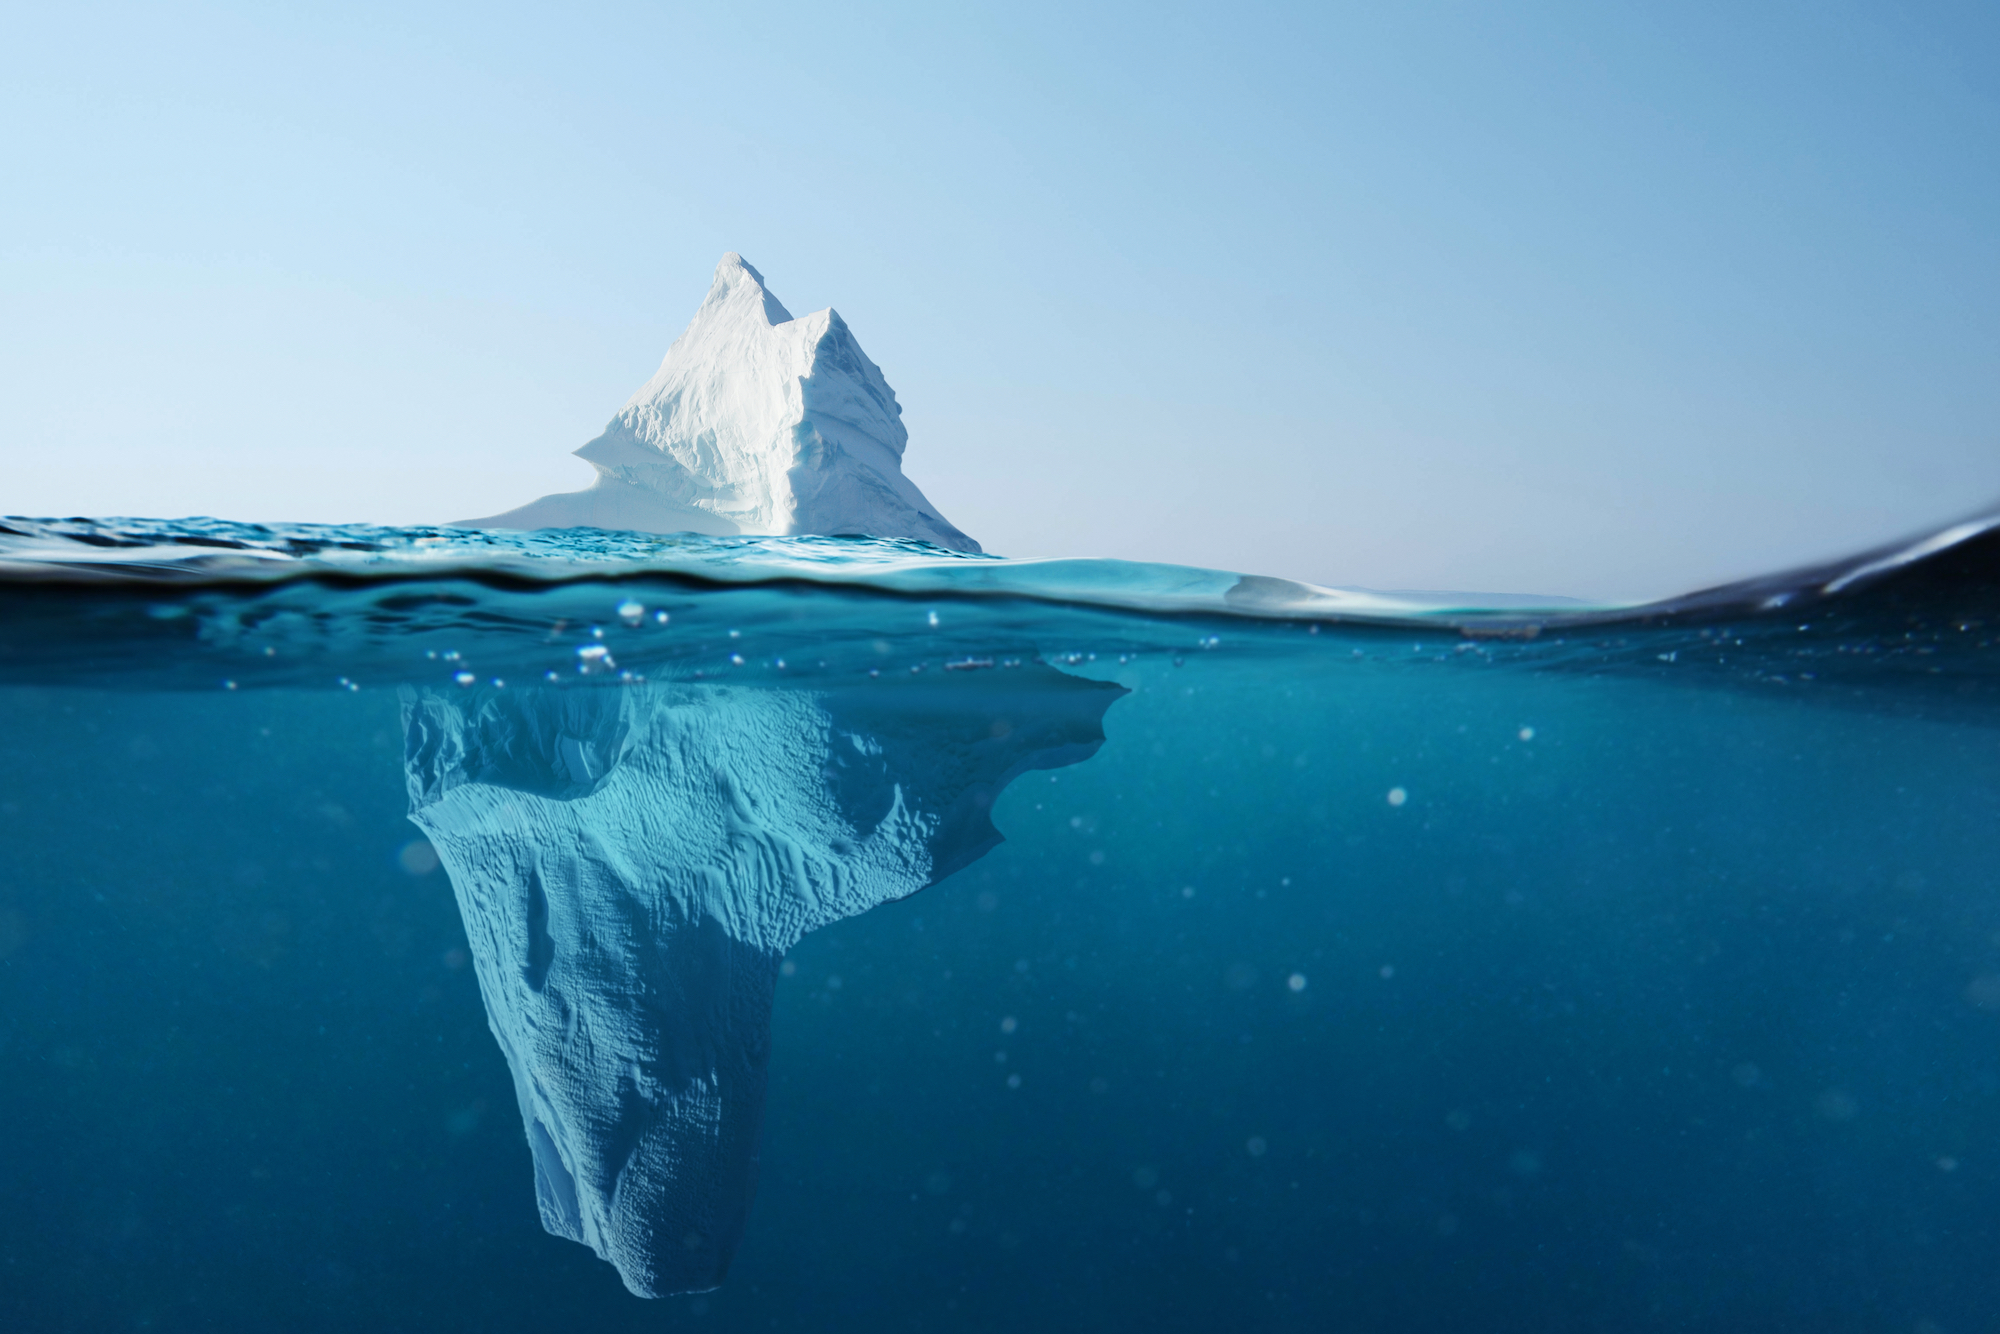 Feature Image: Hidden Benefits of Azure Cloud Migration. Image: An iceberg that is much larger under the surface of the water than what is visible above the water.